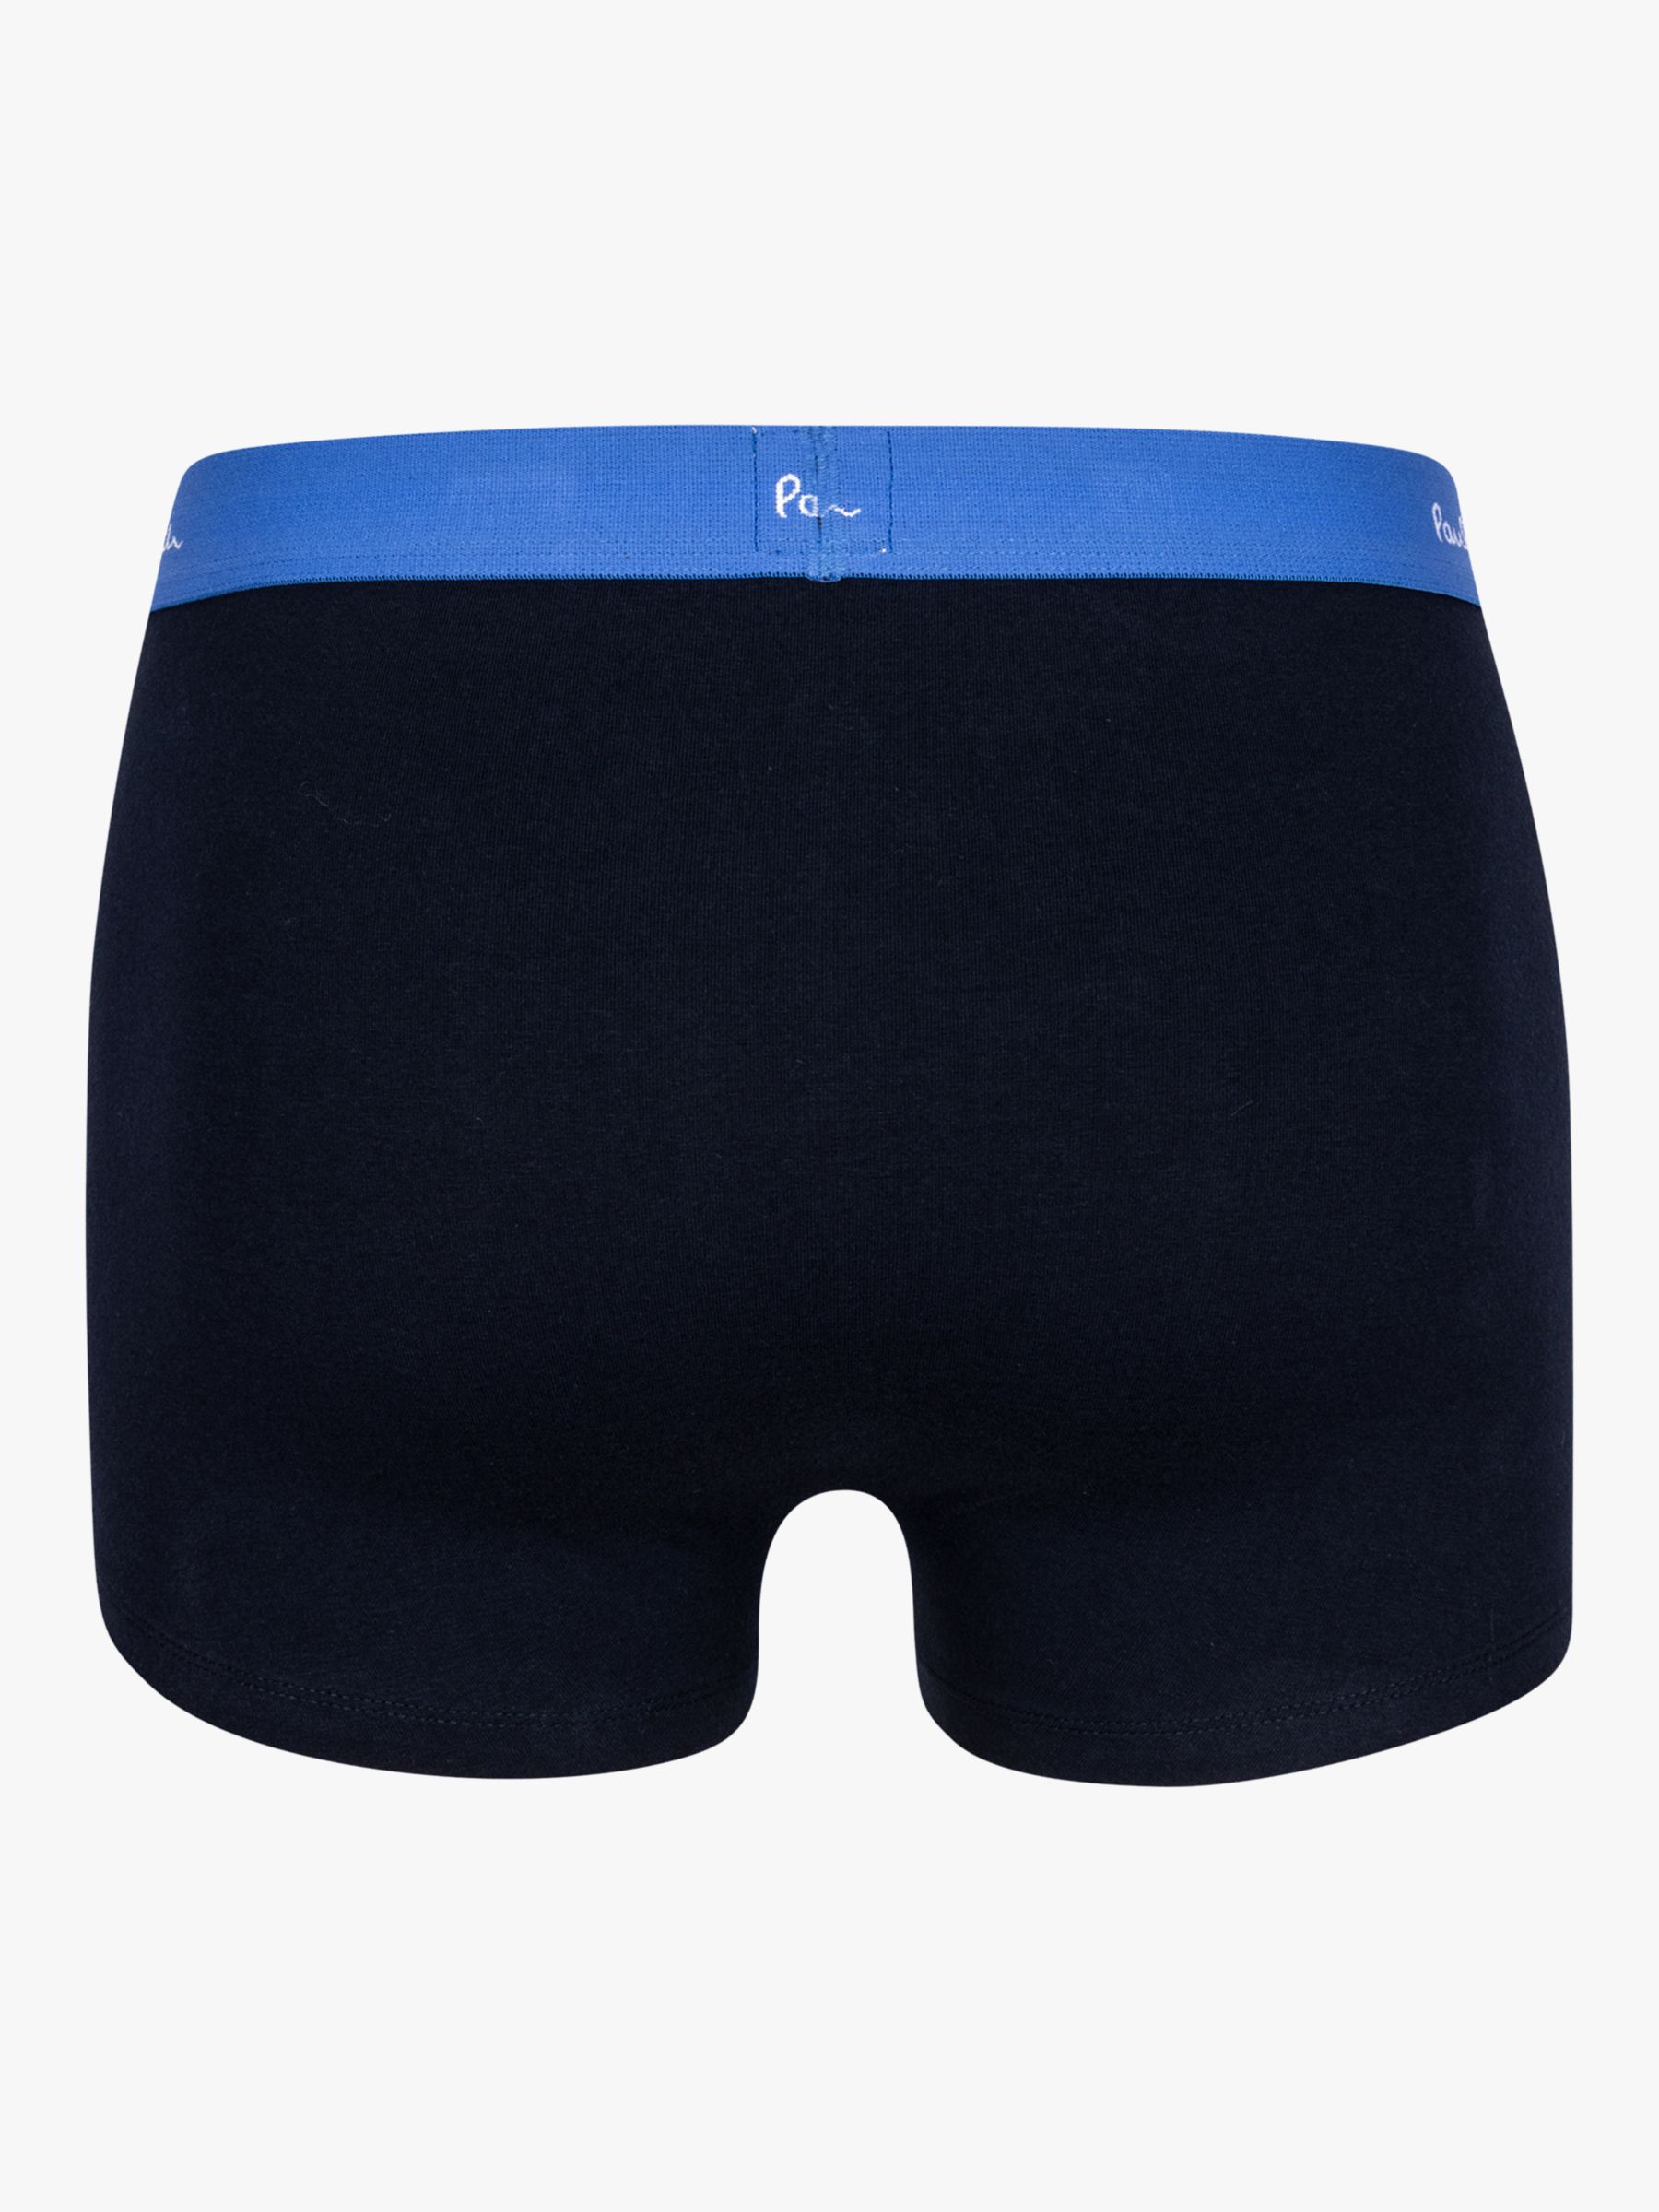 Buy Paul Smith Organic Cotton Blend Boxer Briefs, Pack of 3, Black/Multi Online at johnlewis.com